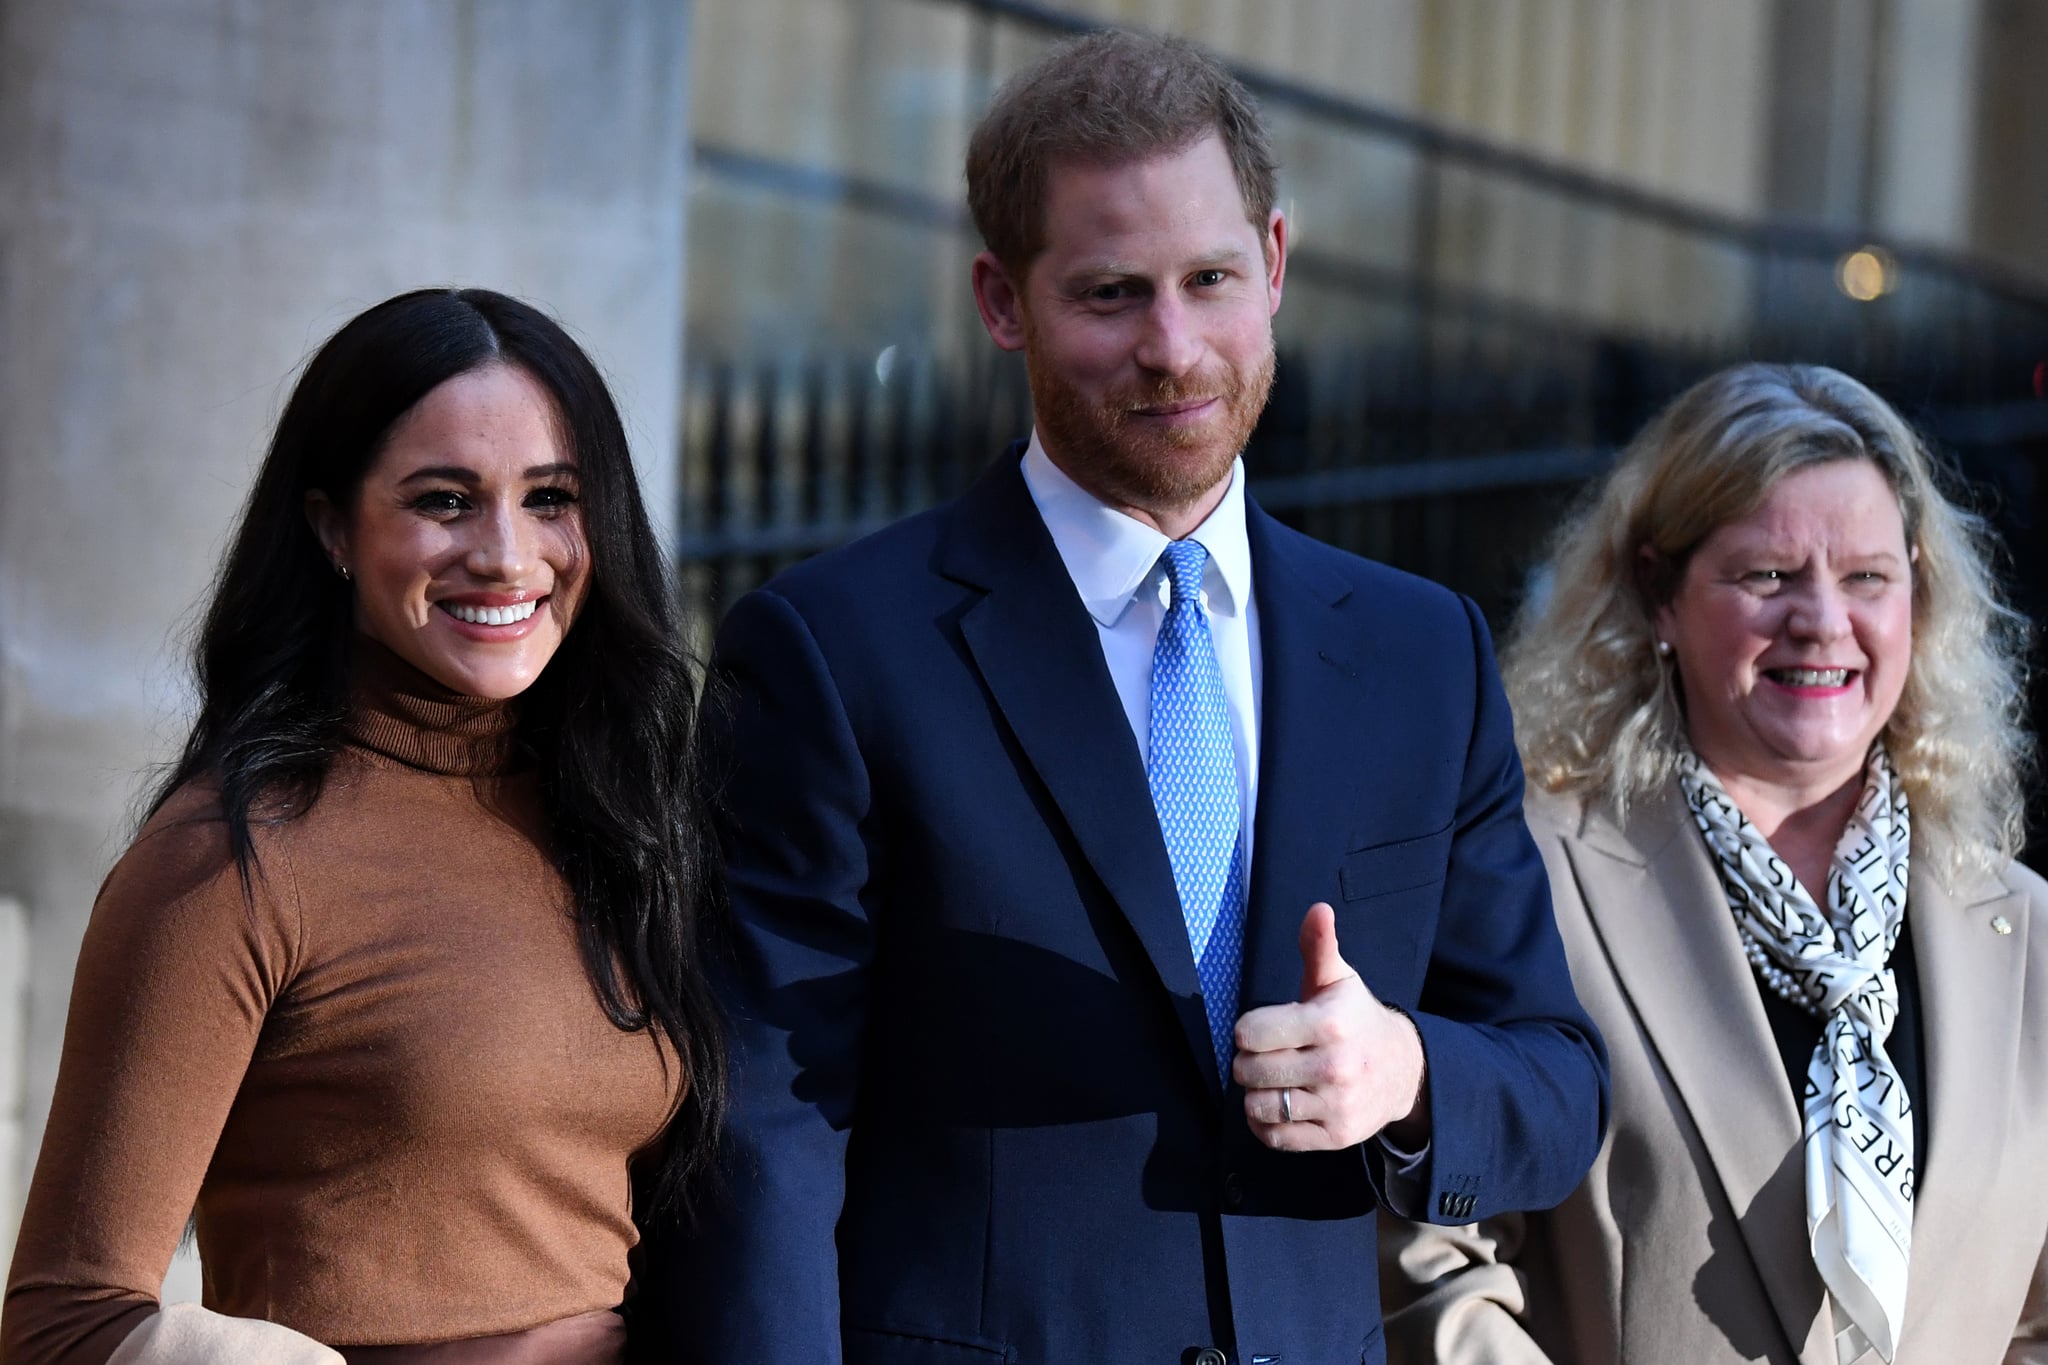 LONDON, UNITED KINGDOM - JANUARY 07: Prince Harry, Duke of Sussex and Meghan, Duchess of Sussex stand with the High Commissioner for Canada in the United Kingdom, Janice Charette (R) as they leave after their visit to Canada House in thanks for the warm Canadian hospitality and support they received during their recent stay in Canada, on January 7, 2020 in London, England. (Photo by DANIEL LEAL-OLIVAS  - WPA Pool/Getty Images)